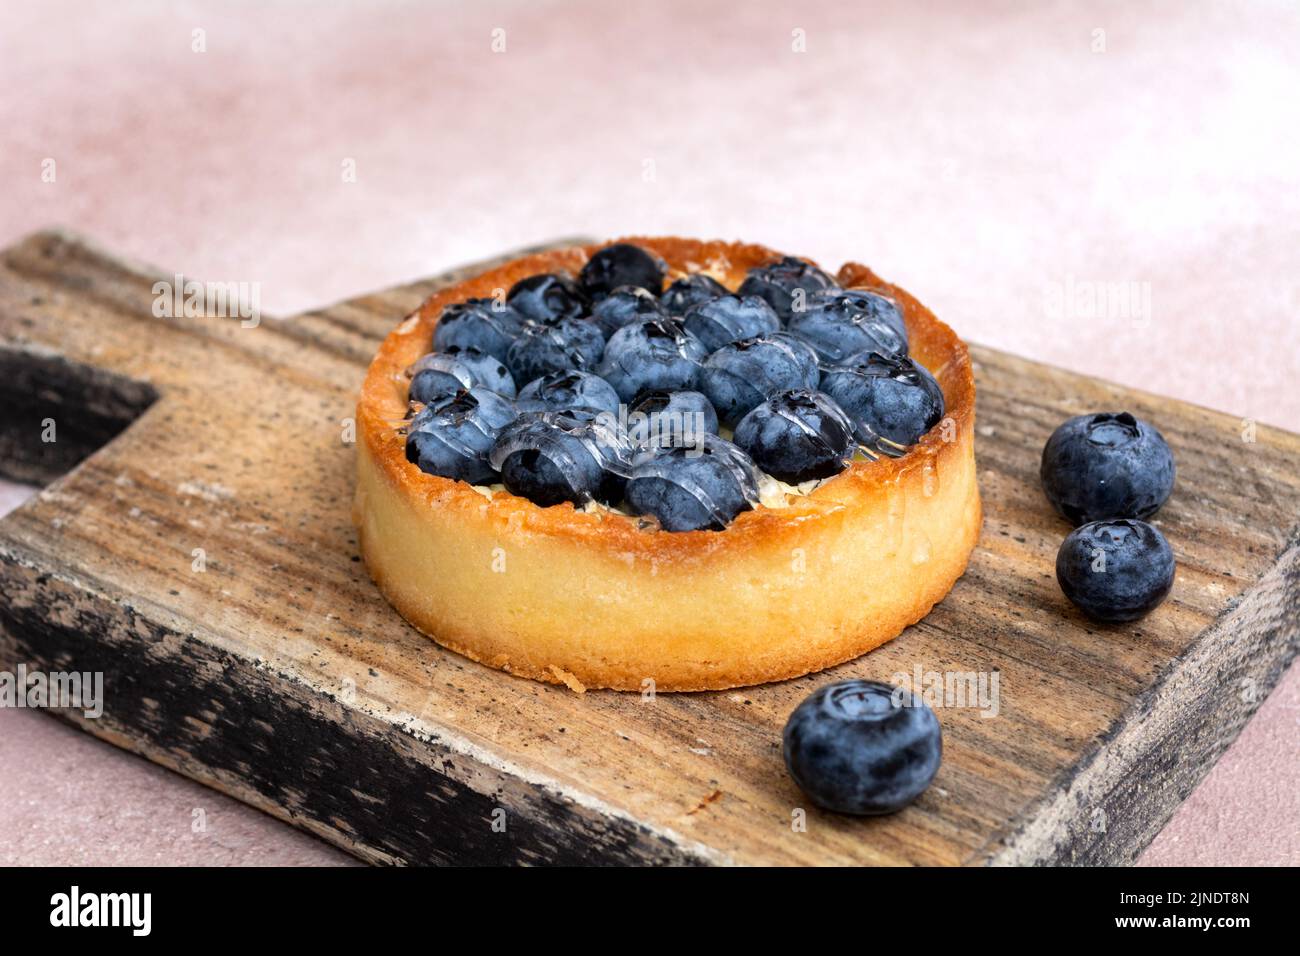 Blueberry pie on a wooden board. Blueberry tart. Berry dessert on a wooden background. Stock Photo